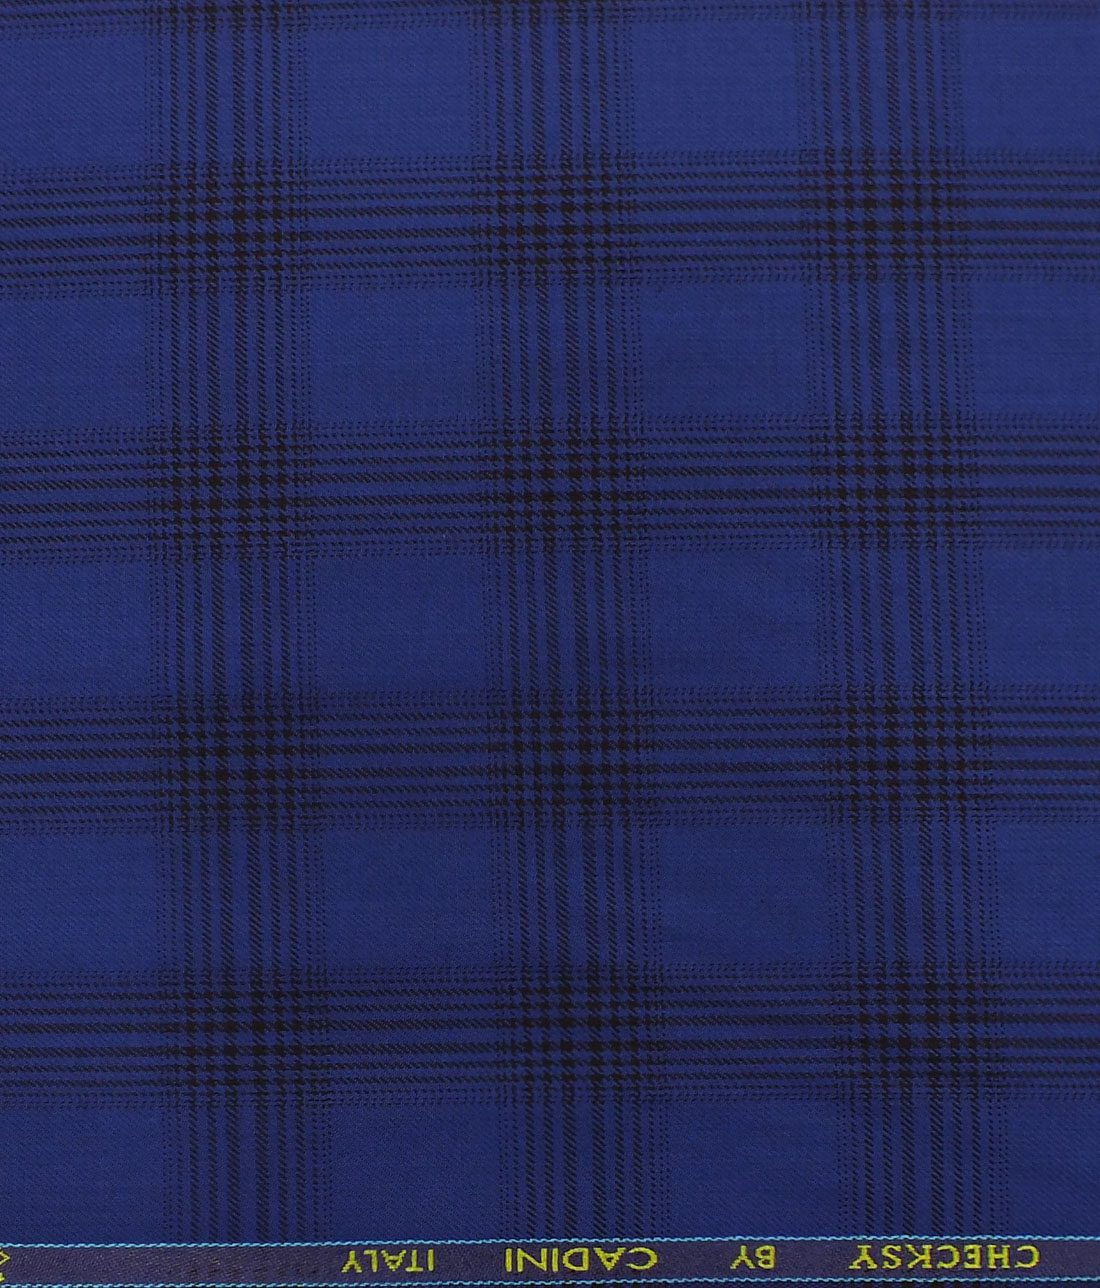 Cadini Italy by Siyaram's Bright Royal Blue Broad Checks Poly Viscose Trouser or Blazer or 3 Piece Suit Fabric (Unstitched - 1.25 Mtr)